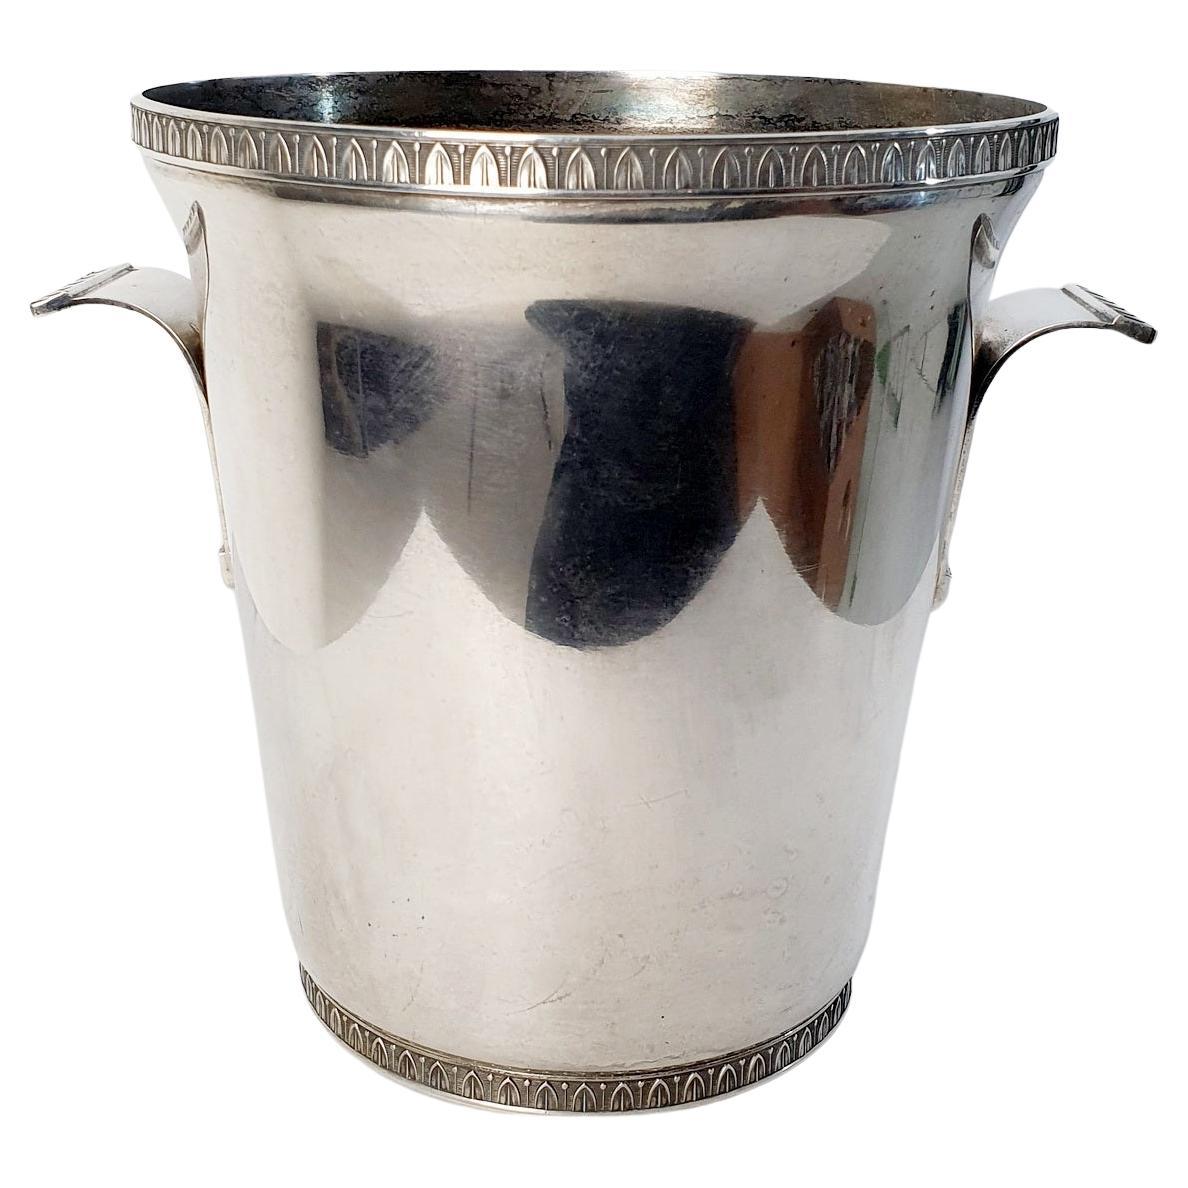 A mid-century silver plated Italian wine cooler in metal from the 1950's. Can also work as an ice bucket.